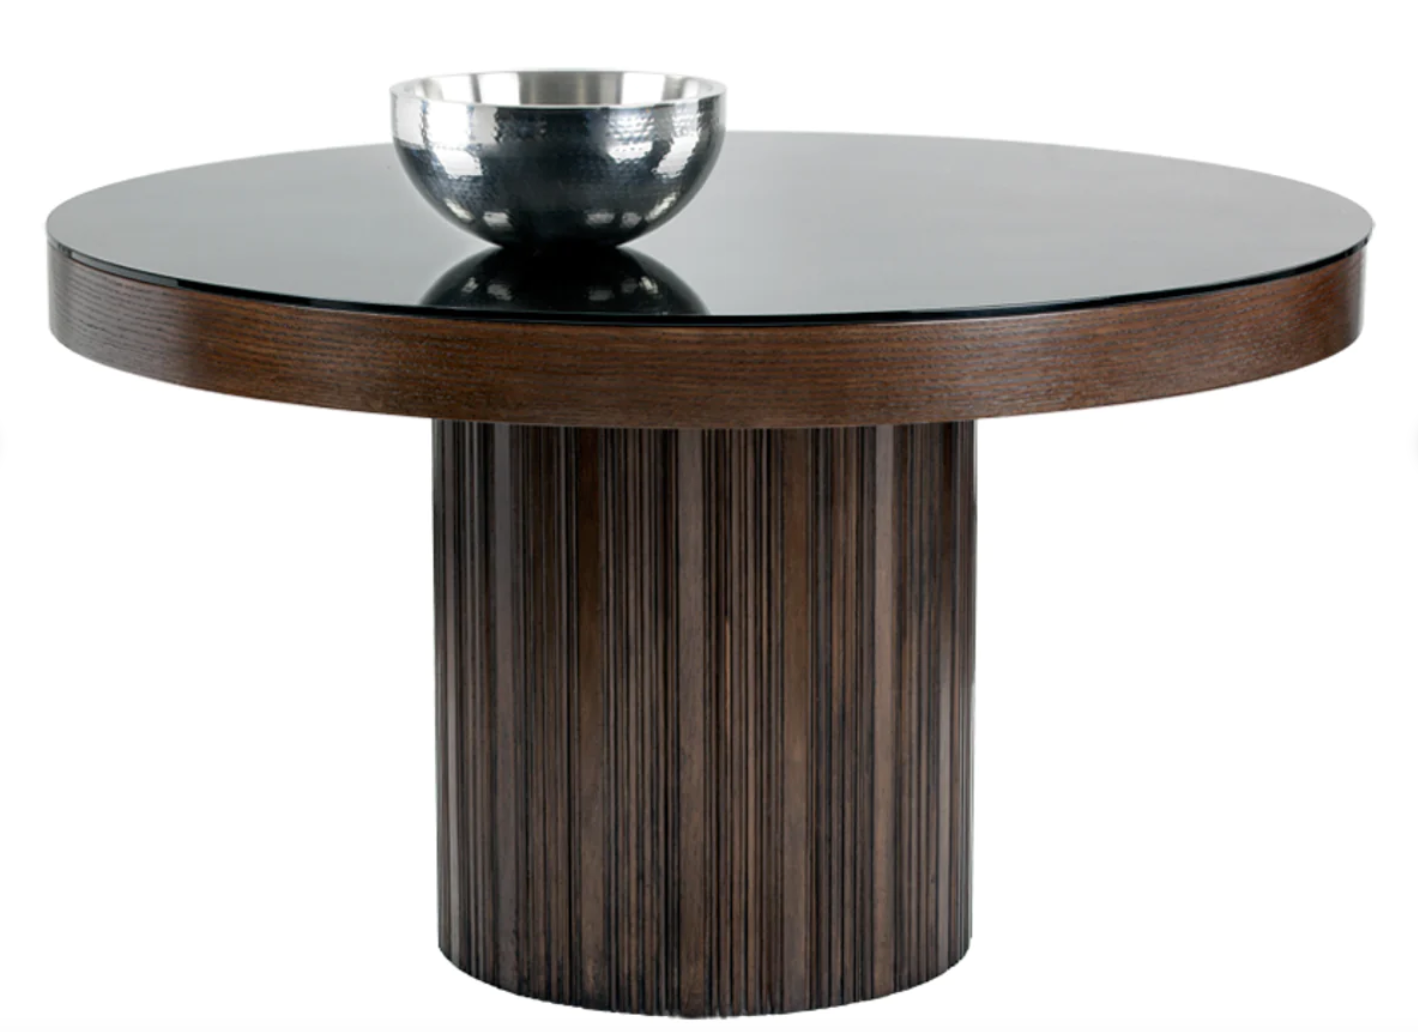 Bali Dining Table - with black tempered glass- 51"